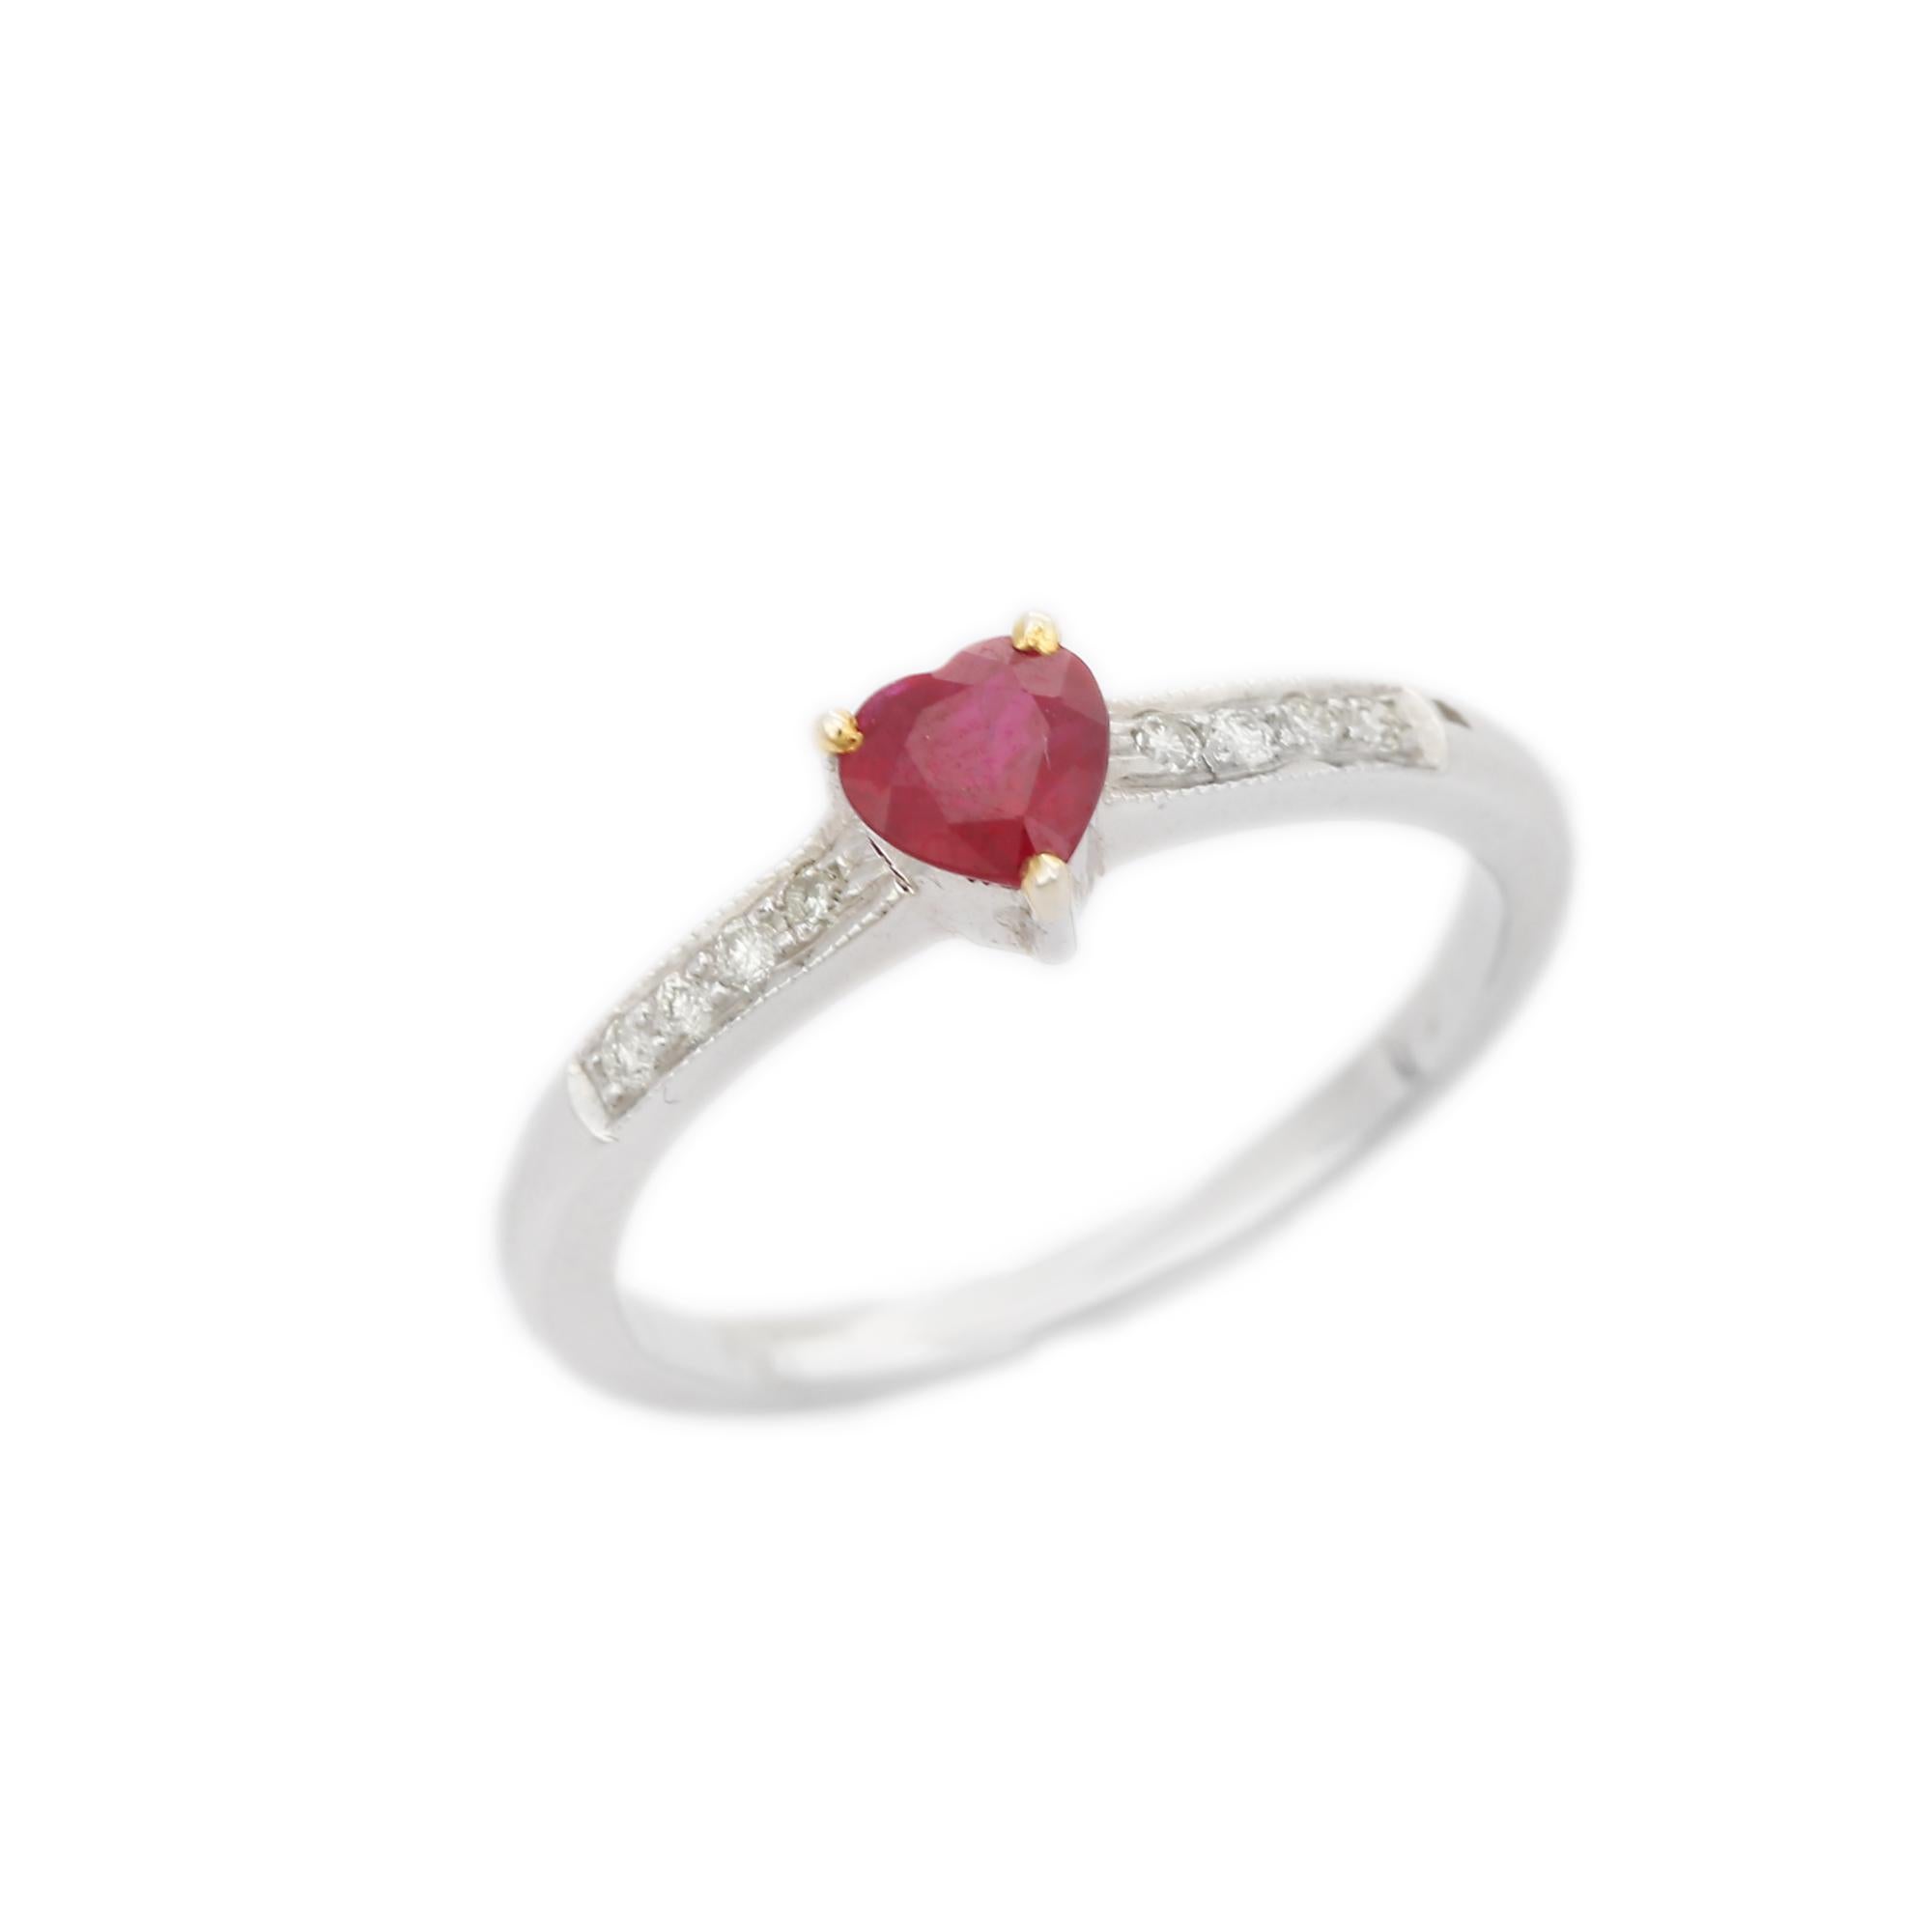 For Sale:  Dainty Heart Cut Ruby Ring 18k Solid White Gold with Diamonds 5